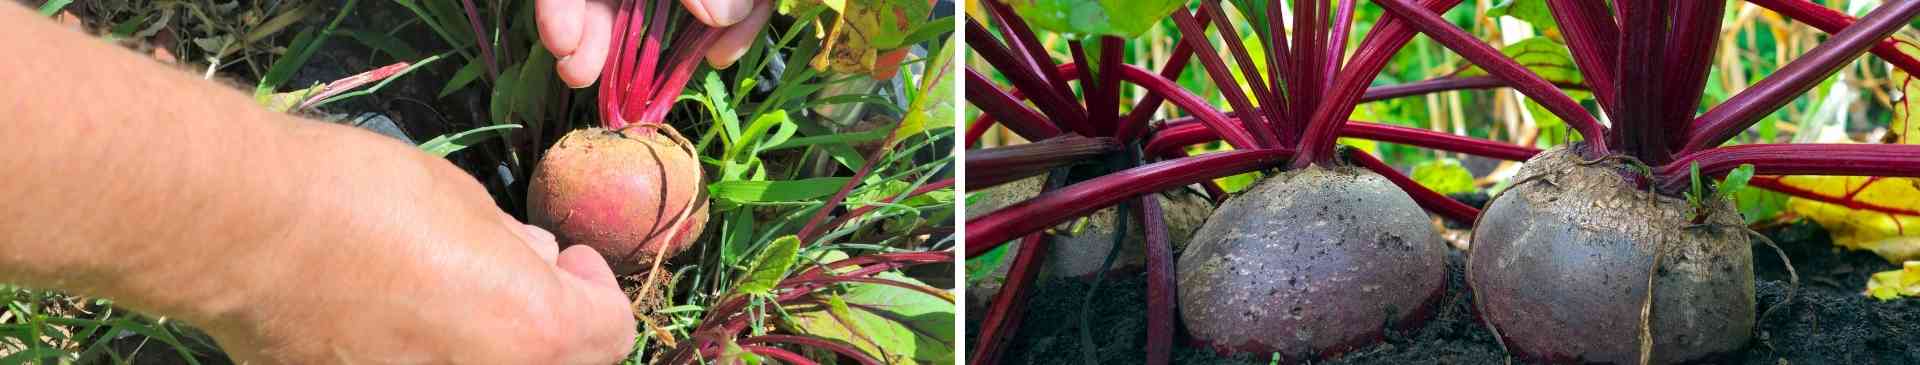 Beetroot: An Underrated Addition to Your Veggie Patch